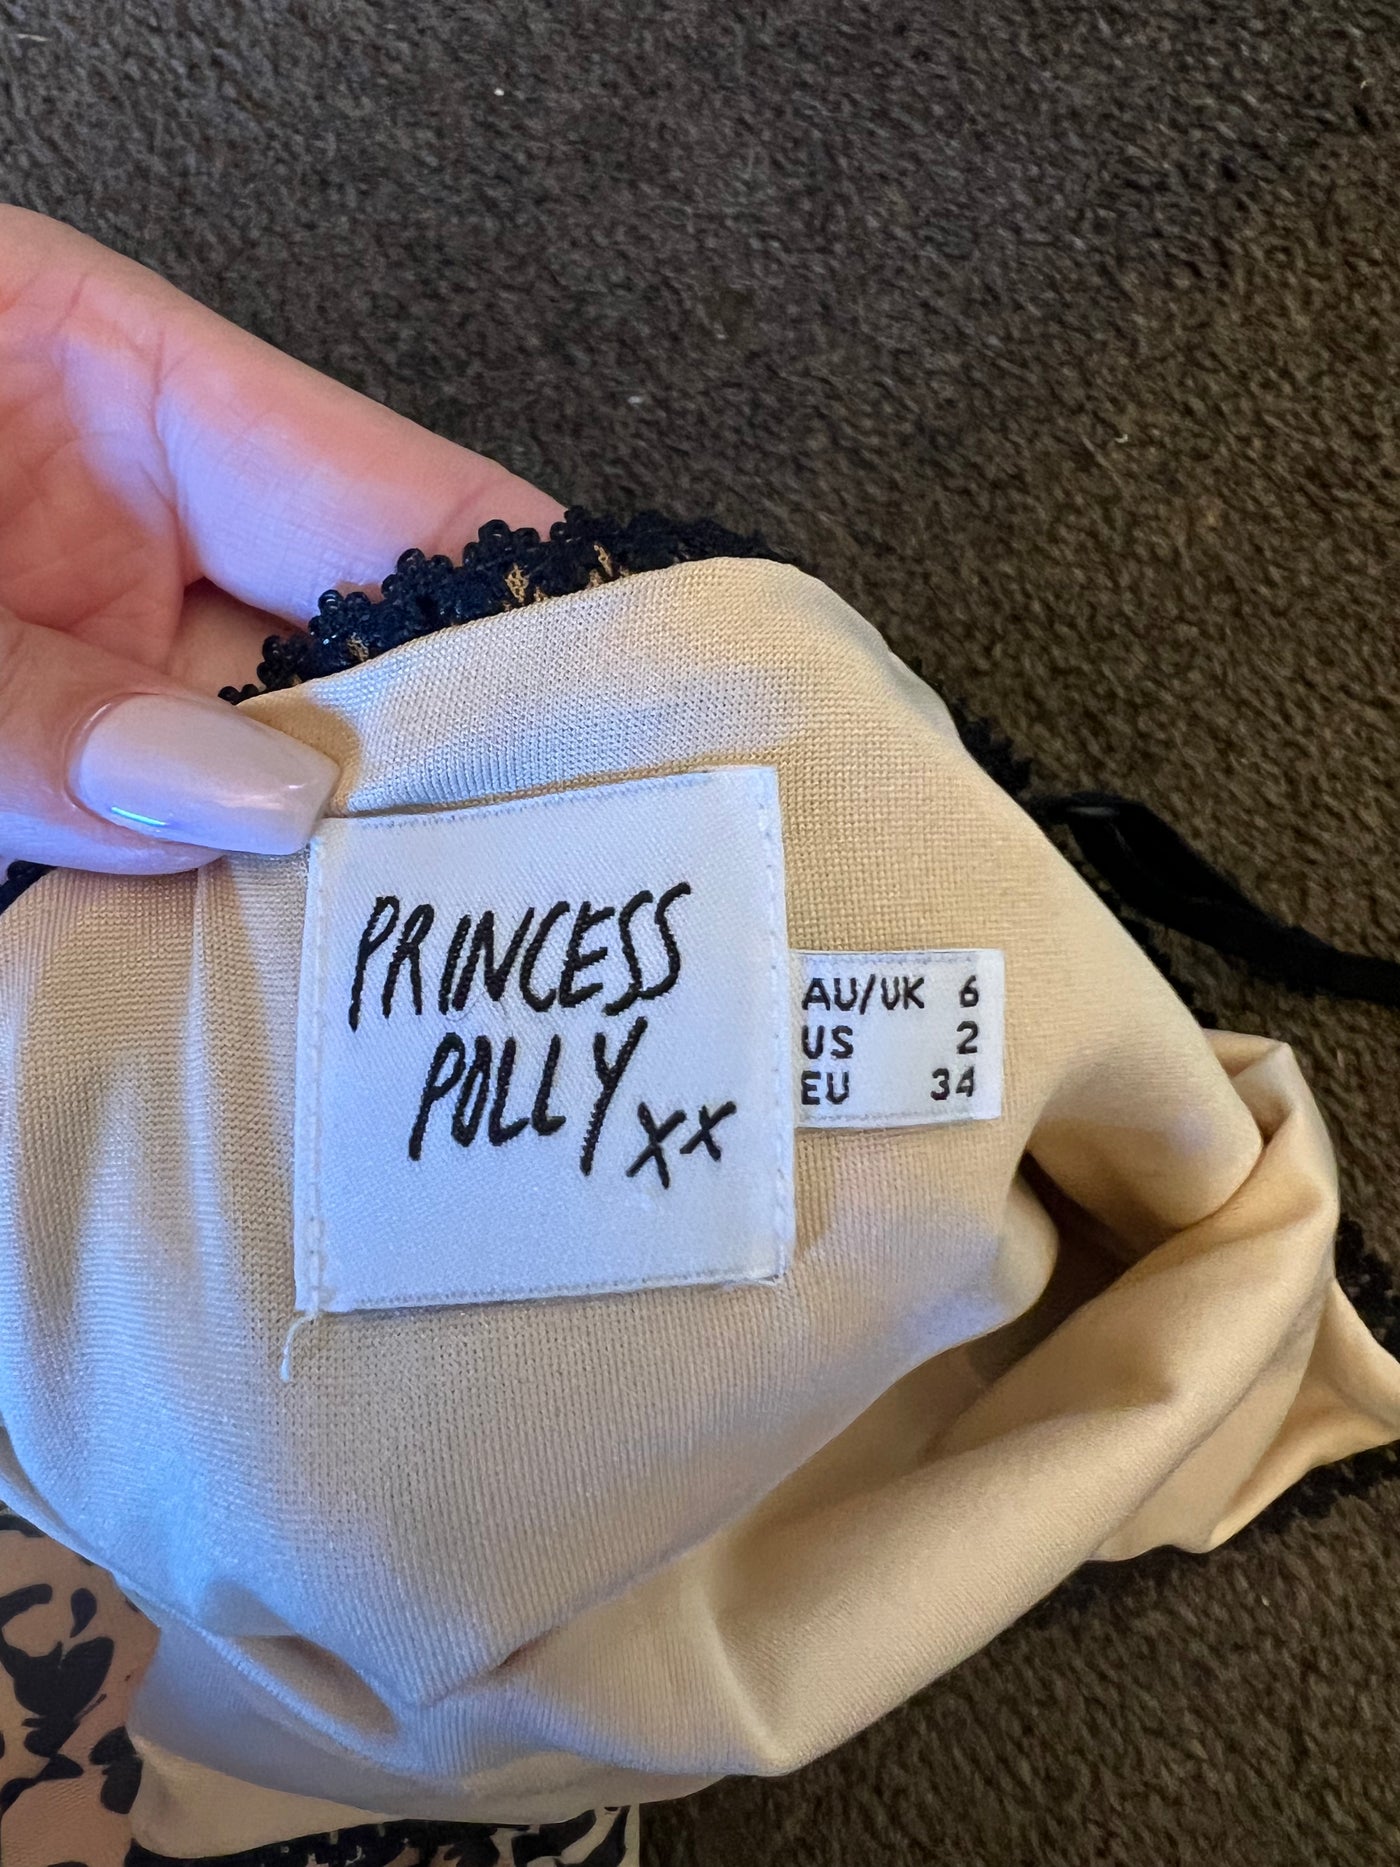 Princess Polly Mini name unknown (For sale)